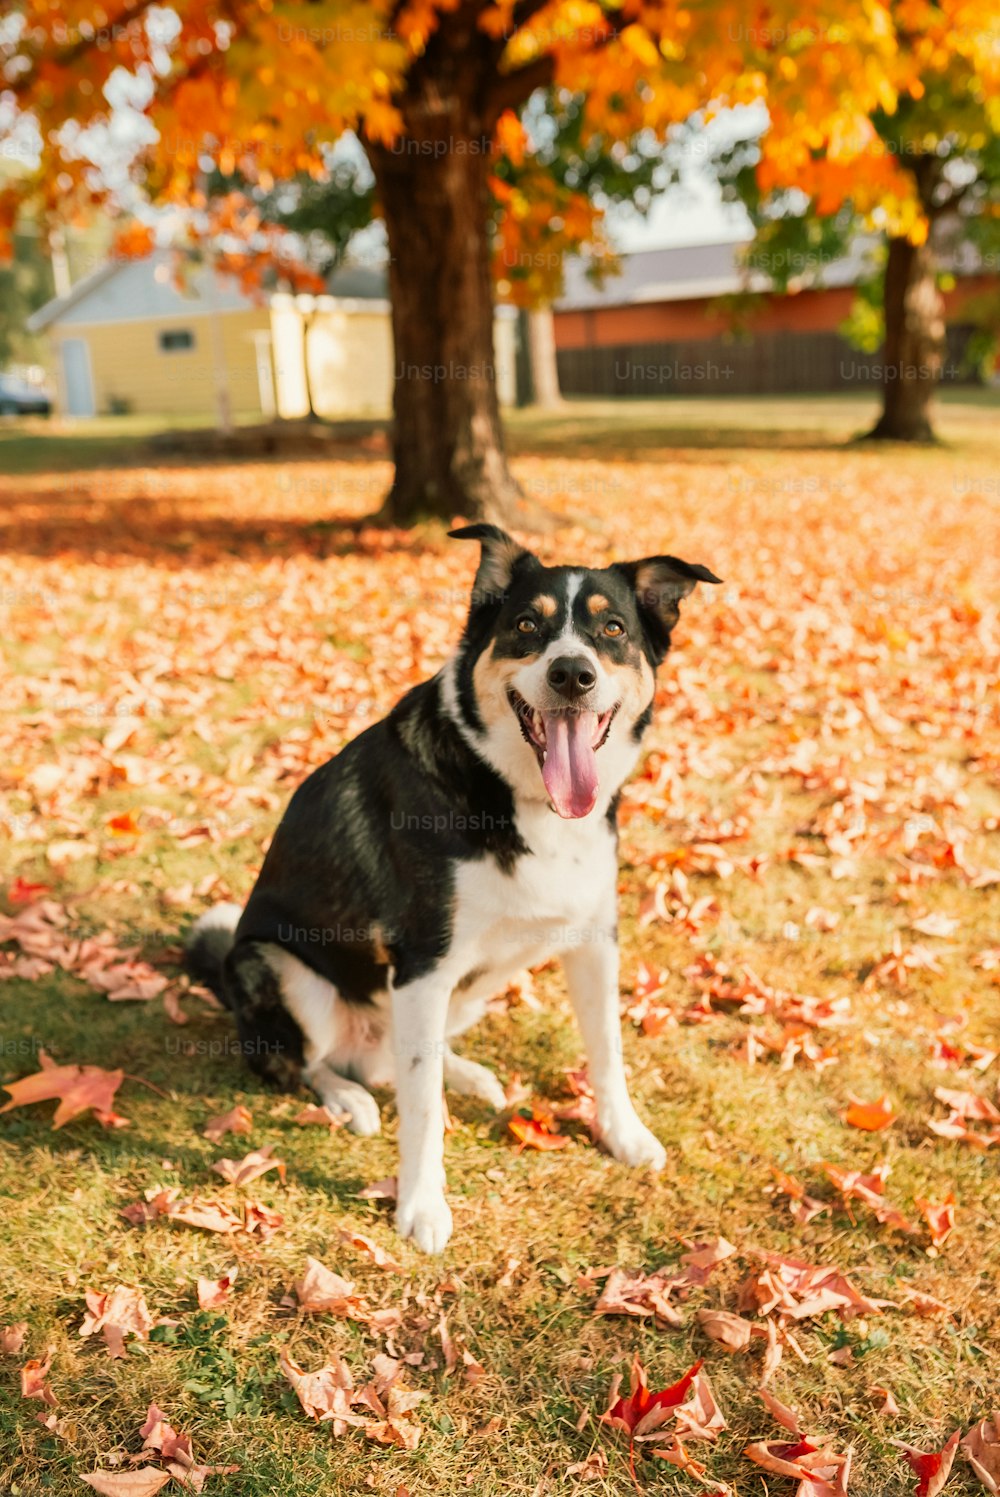 a black and white dog sitting in a field of leaves